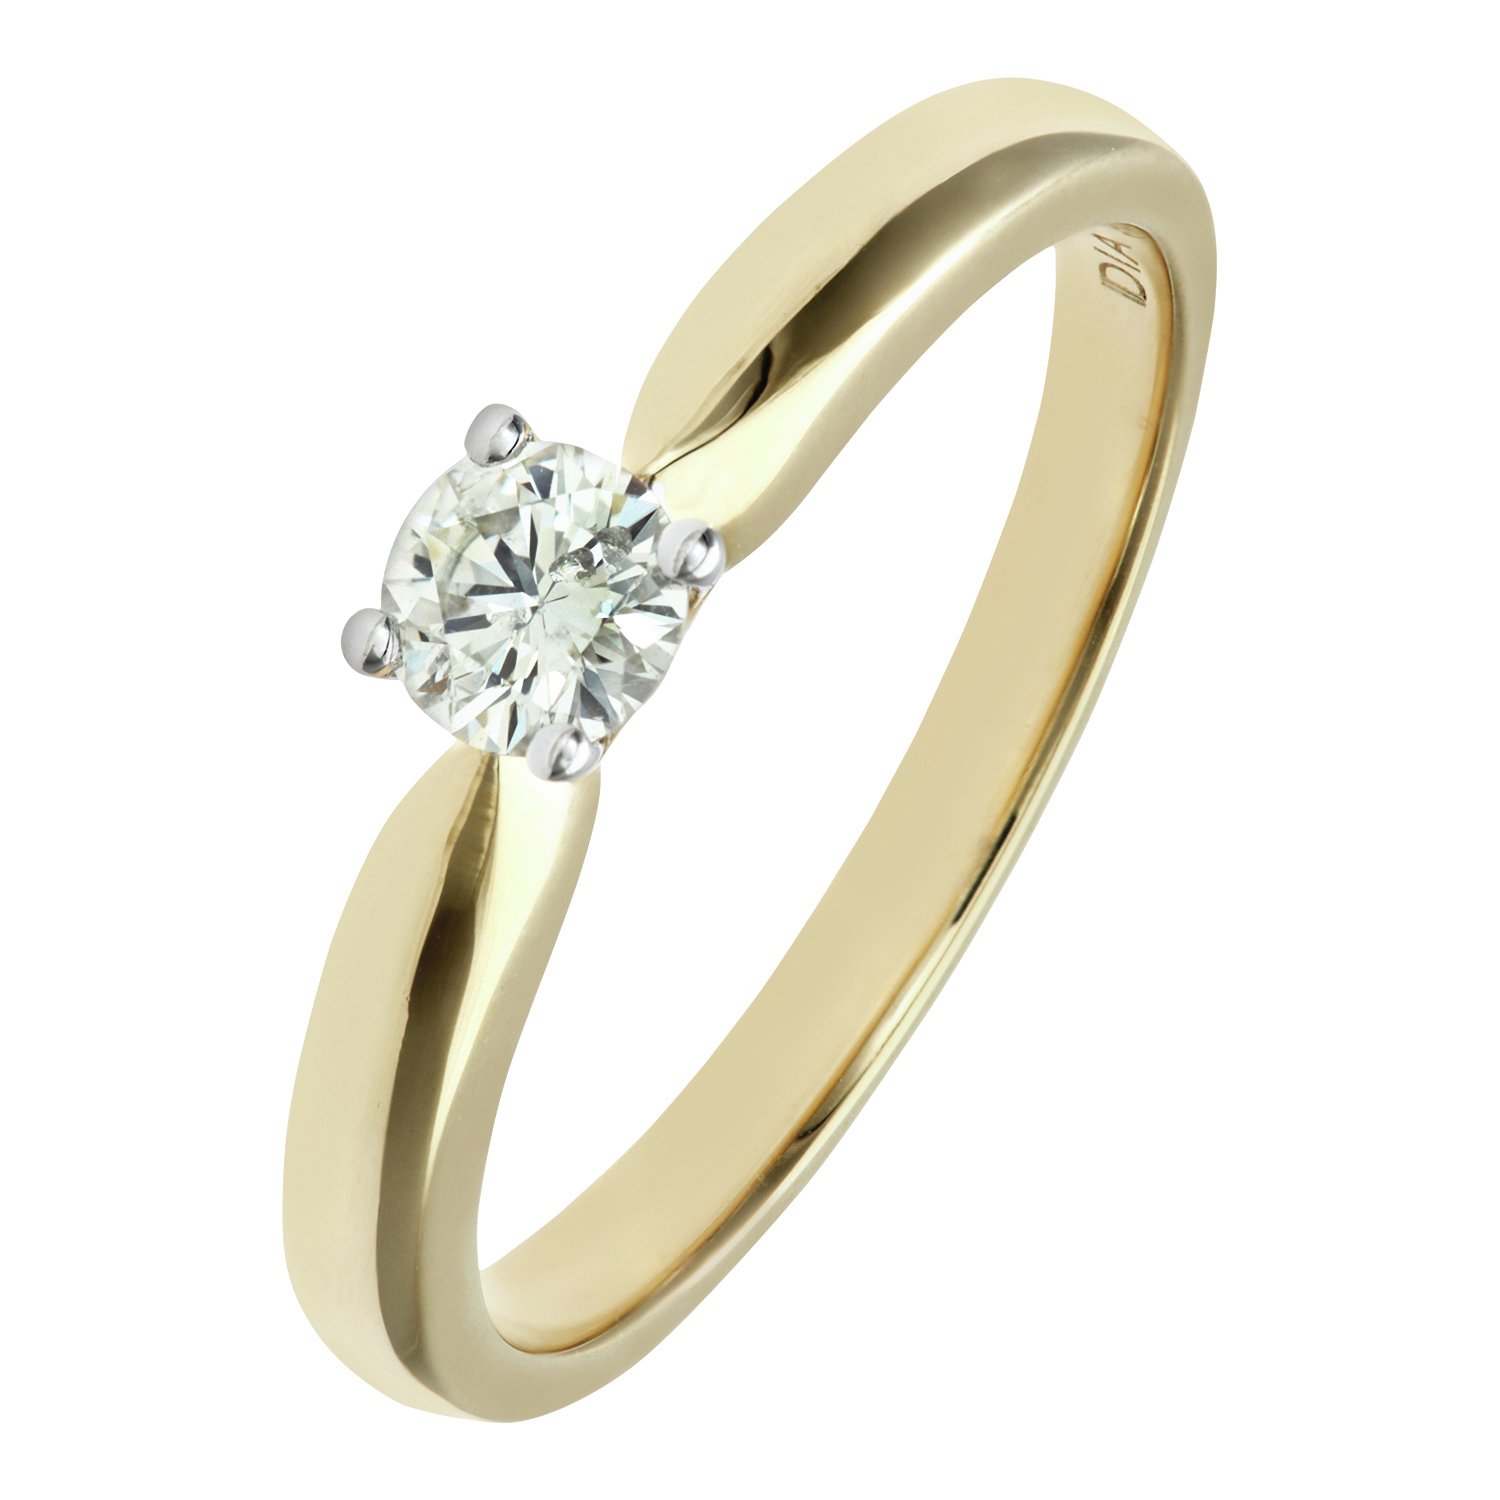 Everlasting Love 9ct Gold Diamond Solitaire Ring - Size K